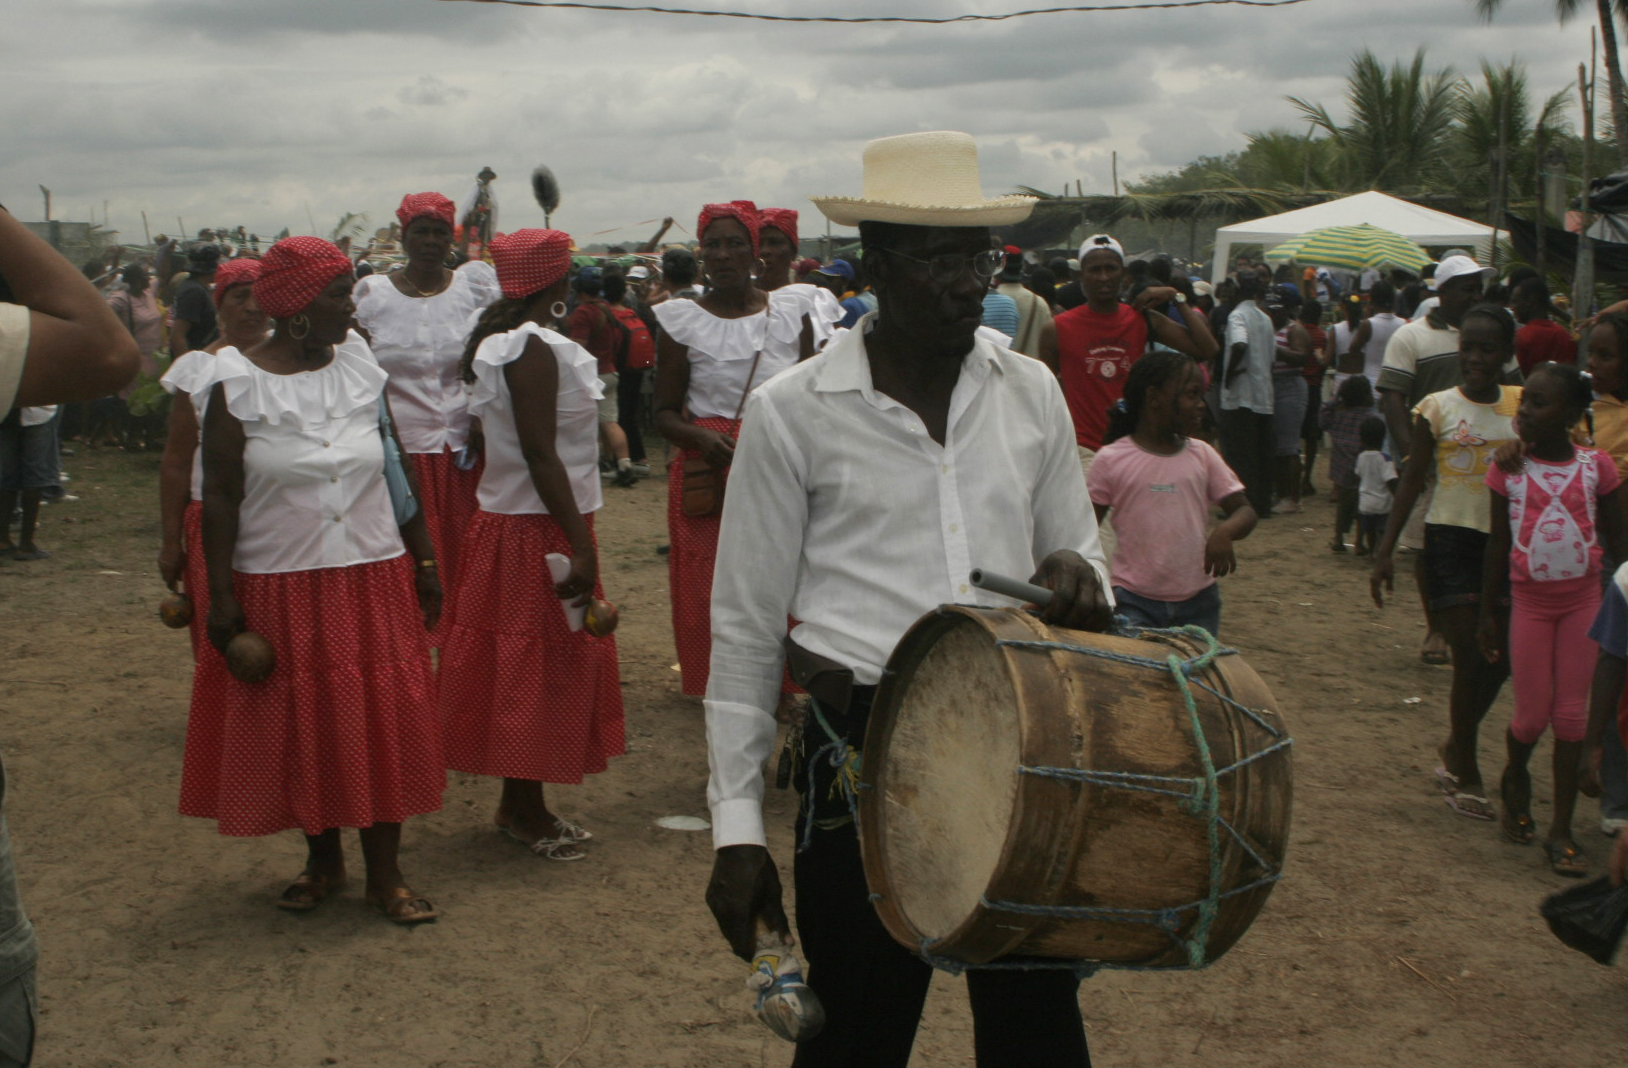 San Martin procession. Drum beats and songs in San Martin procession. 